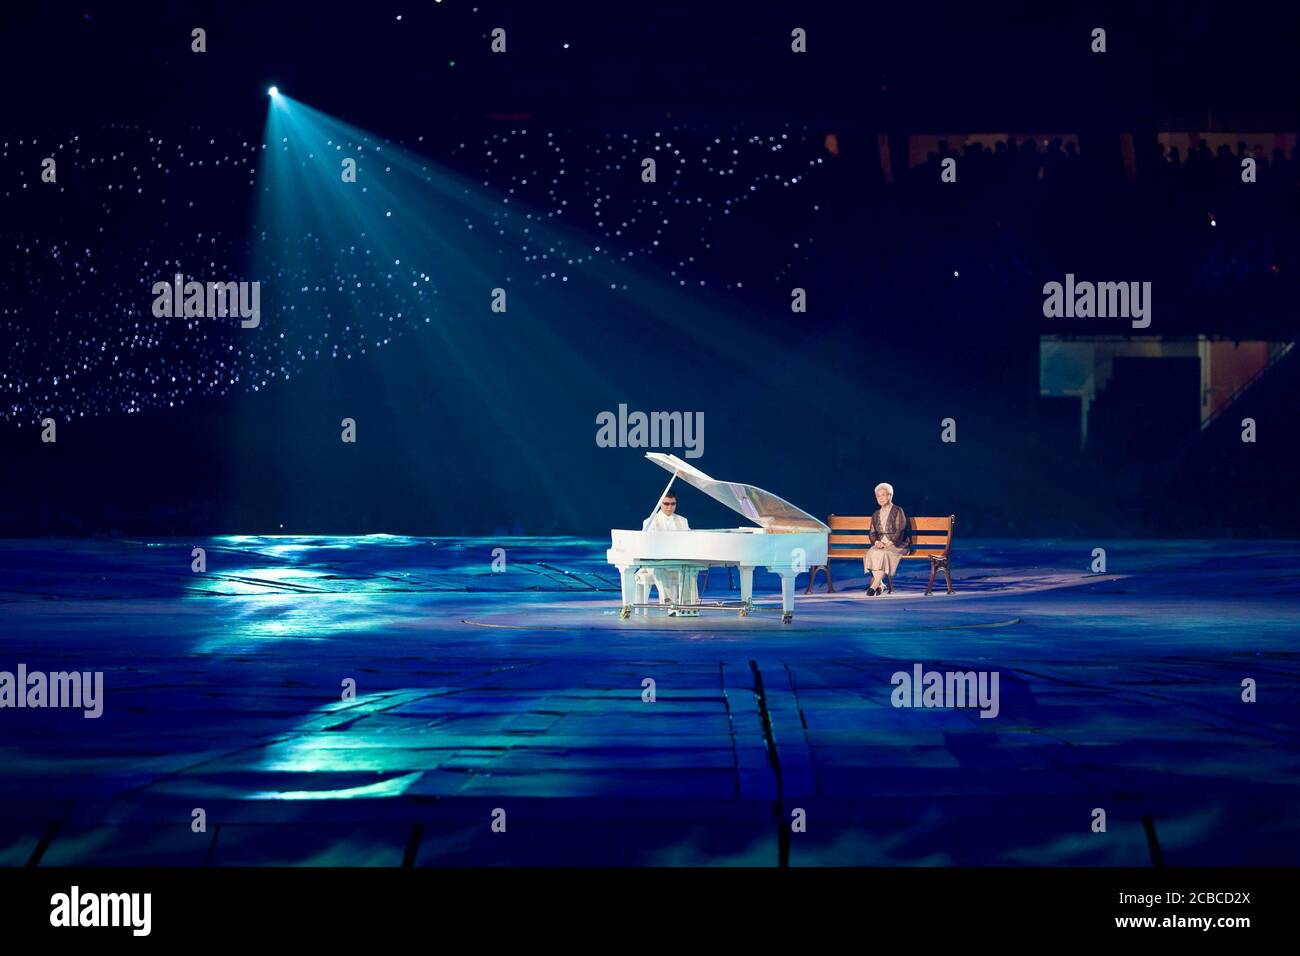 Beijing, China  September 6, 2008: Pianist Fan Jingma (l) performs during the opening ceremonies of the Beijing Paralympics at China's National Stadium, known as the Bird's Nest.      ©Bob Daemmrich Stock Photo